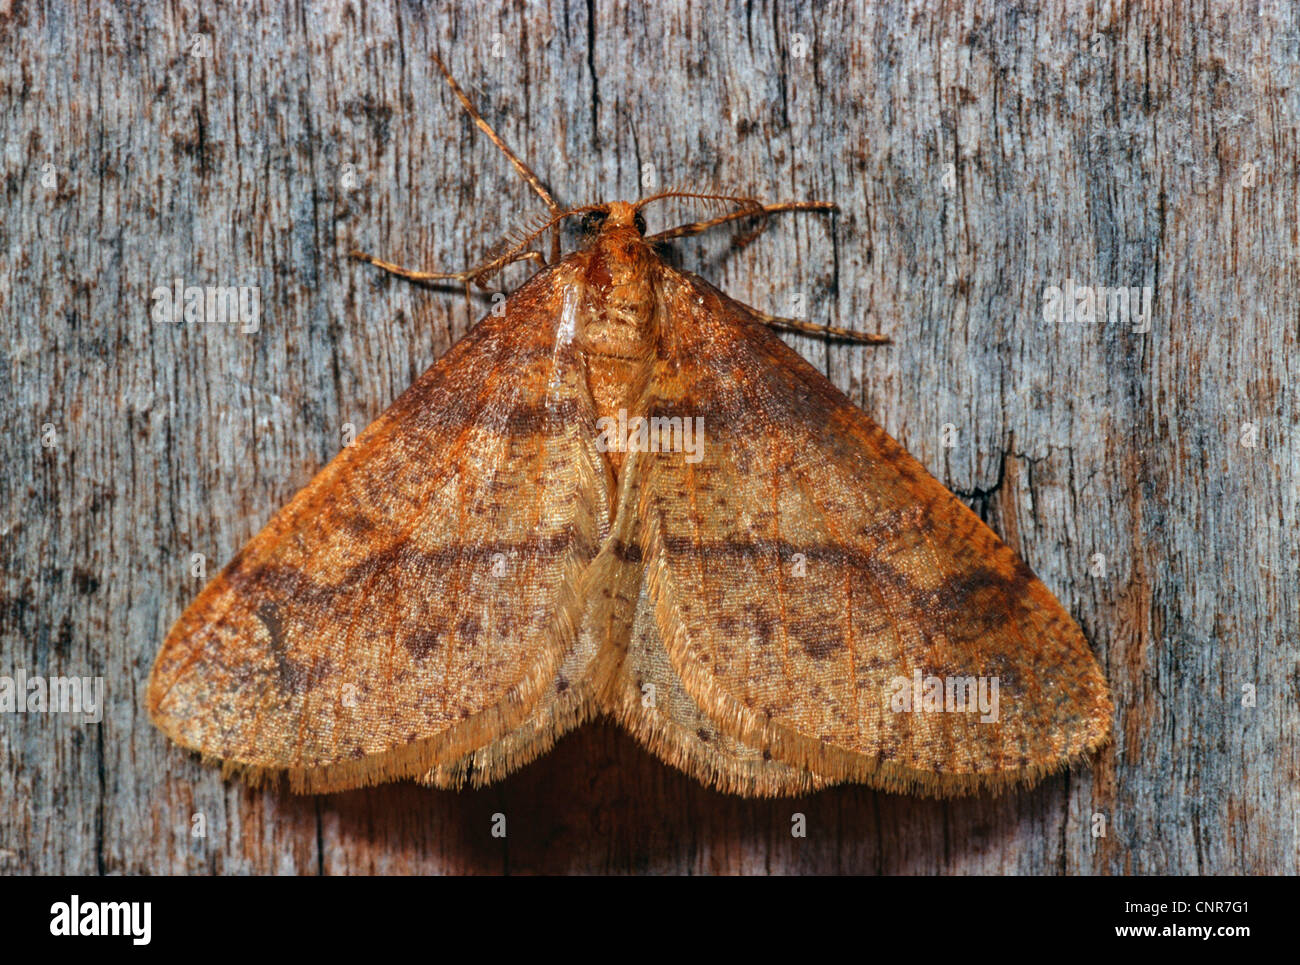 Scarce Umber (Agriopis aurantiaria), sitting at a tree trunk, Germany Stock Photo